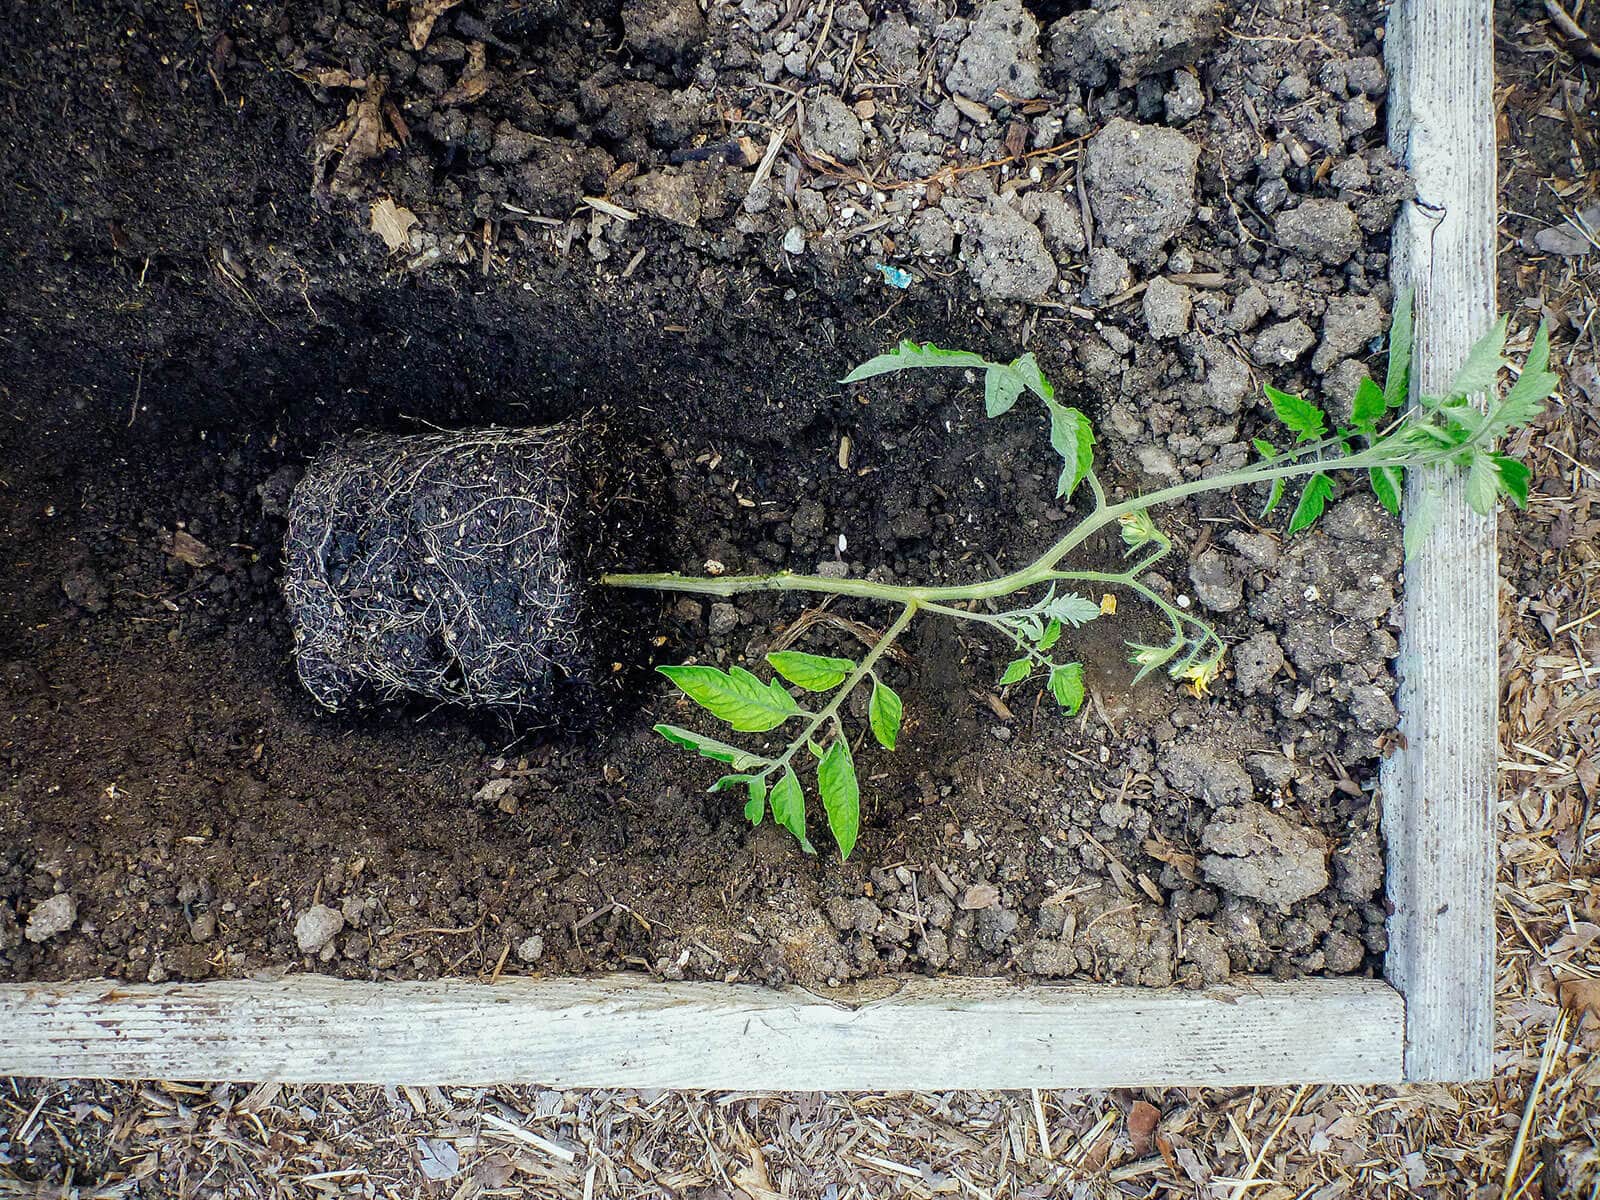 Lay the tomato plant on its side in the trench